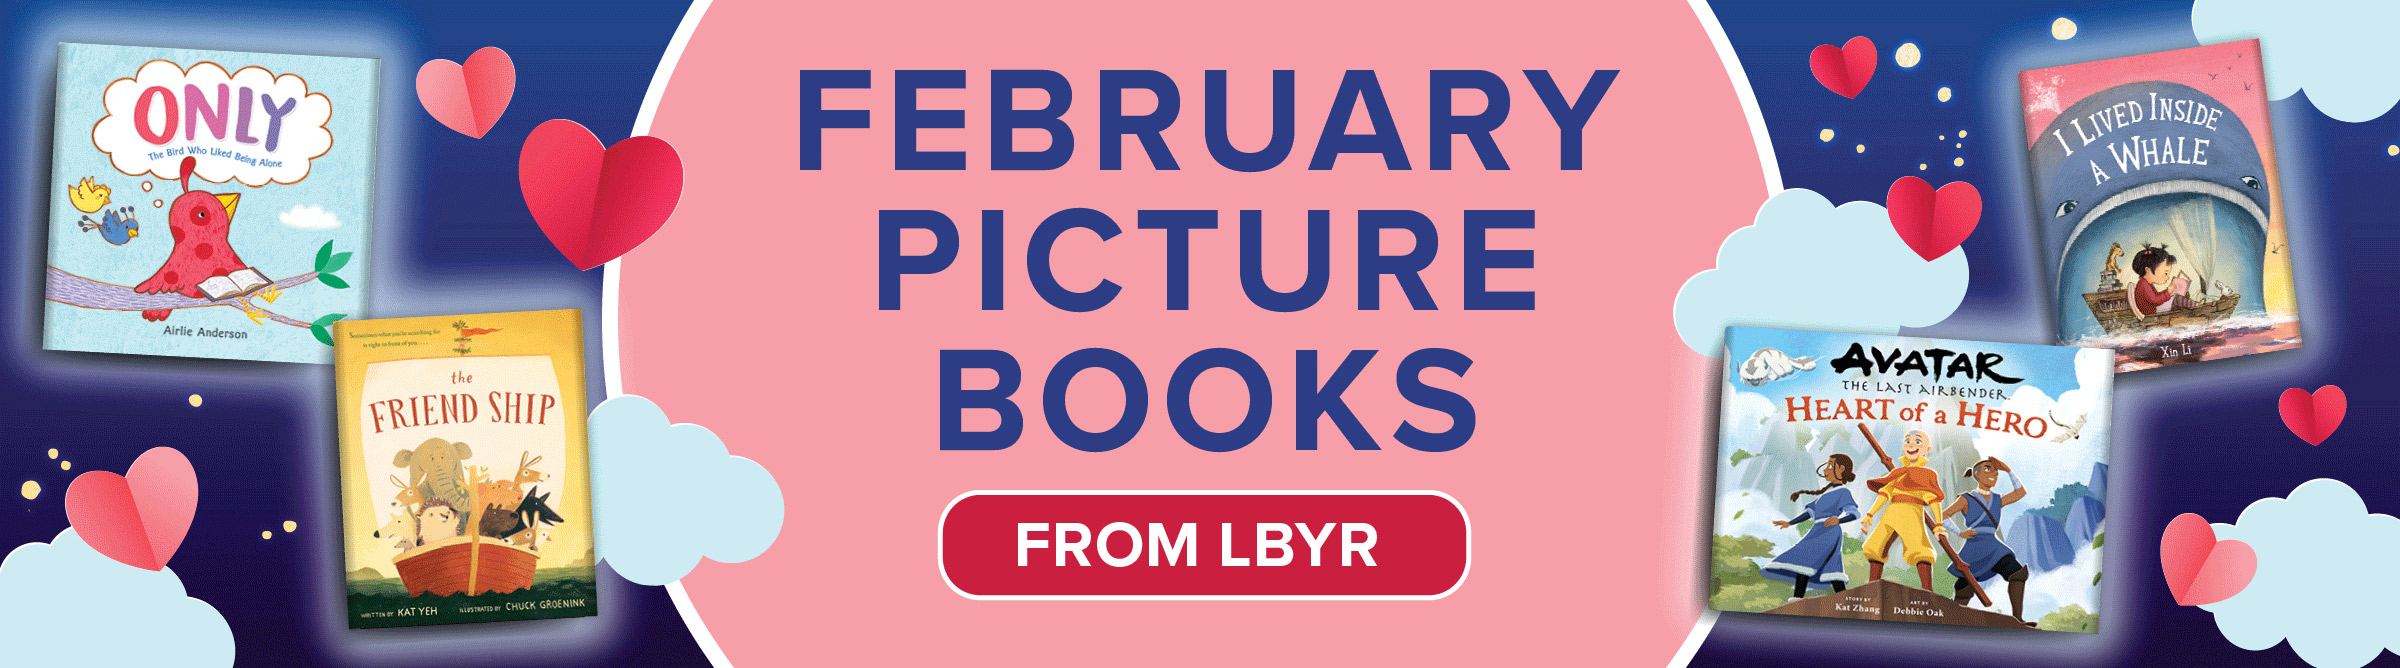 Graphic banner that says "February picture books from LBYR" featuring four books: 'Only,' 'The Friend Ship,' 'I Live Inside a Whale,' and 'Avatar the Last Airbender: Heart of a Hero."